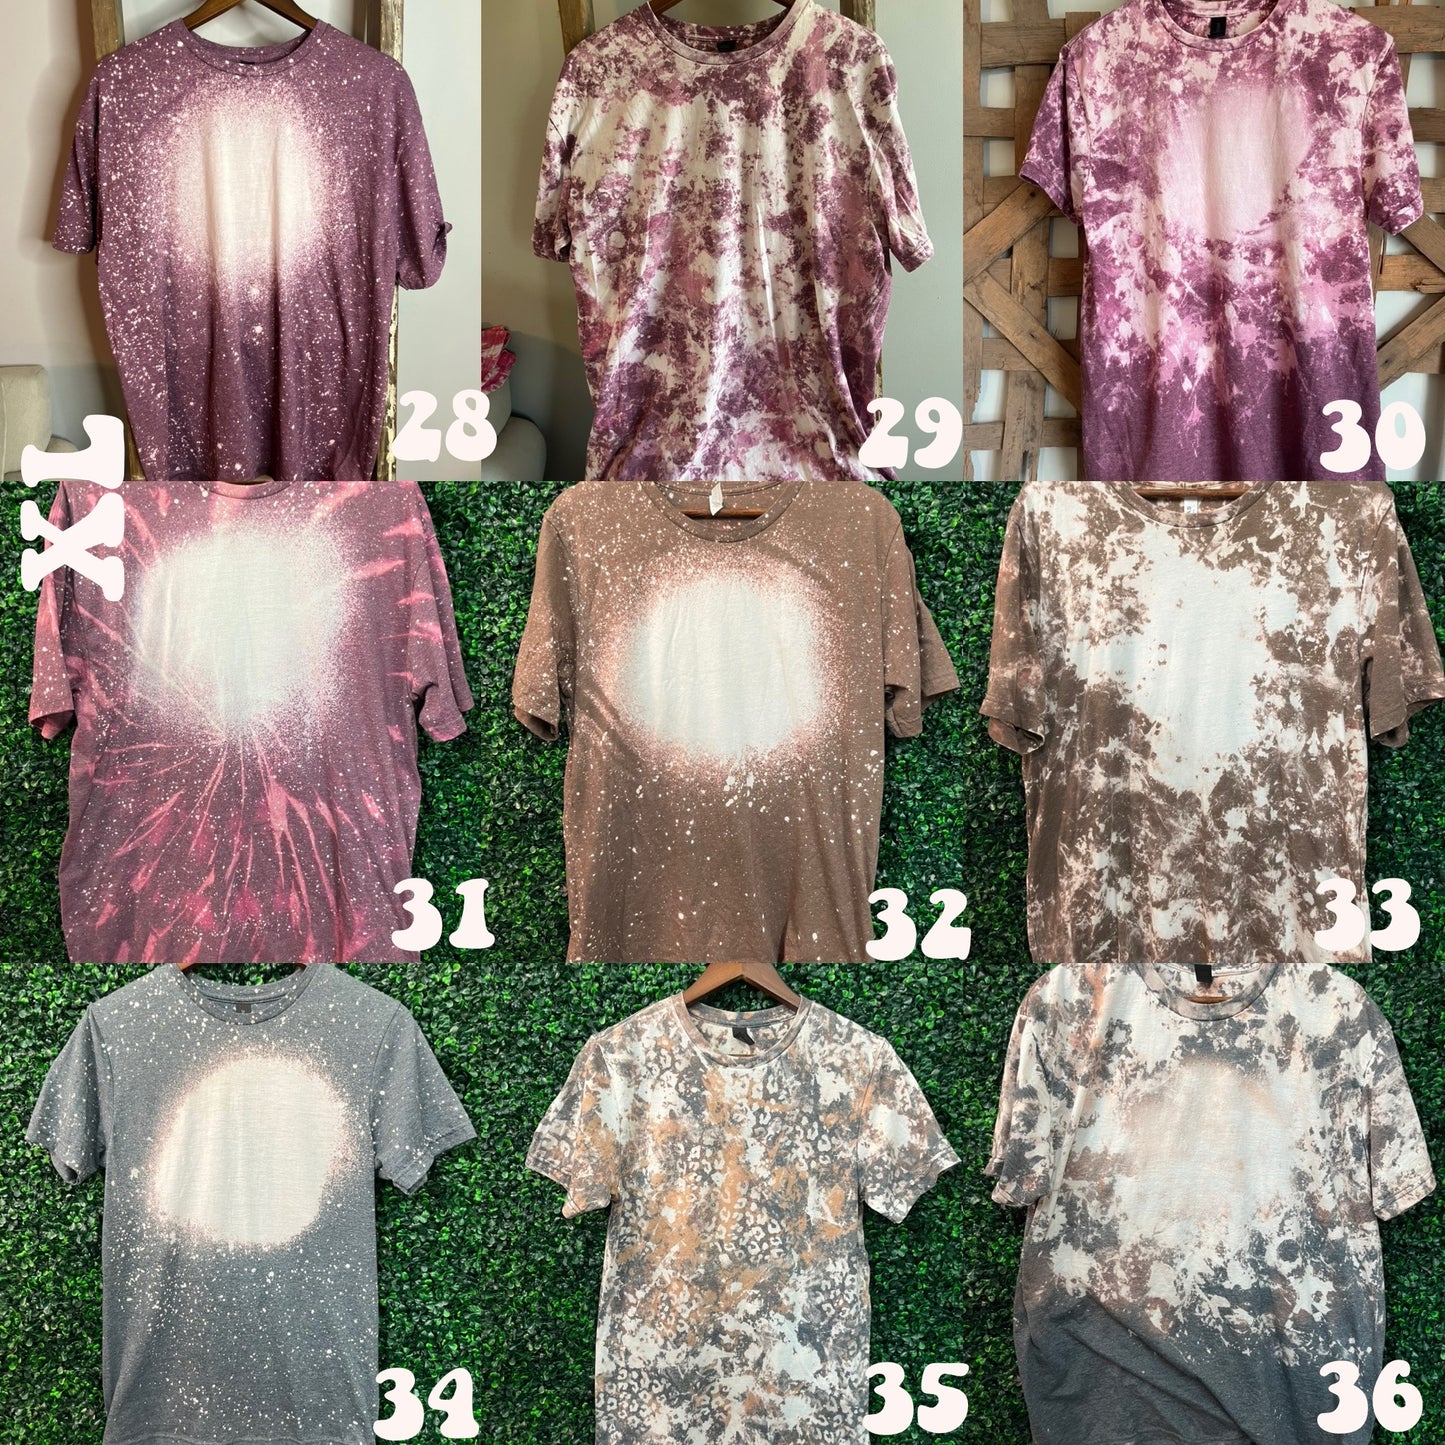 Size XL bleached listing *TEES*